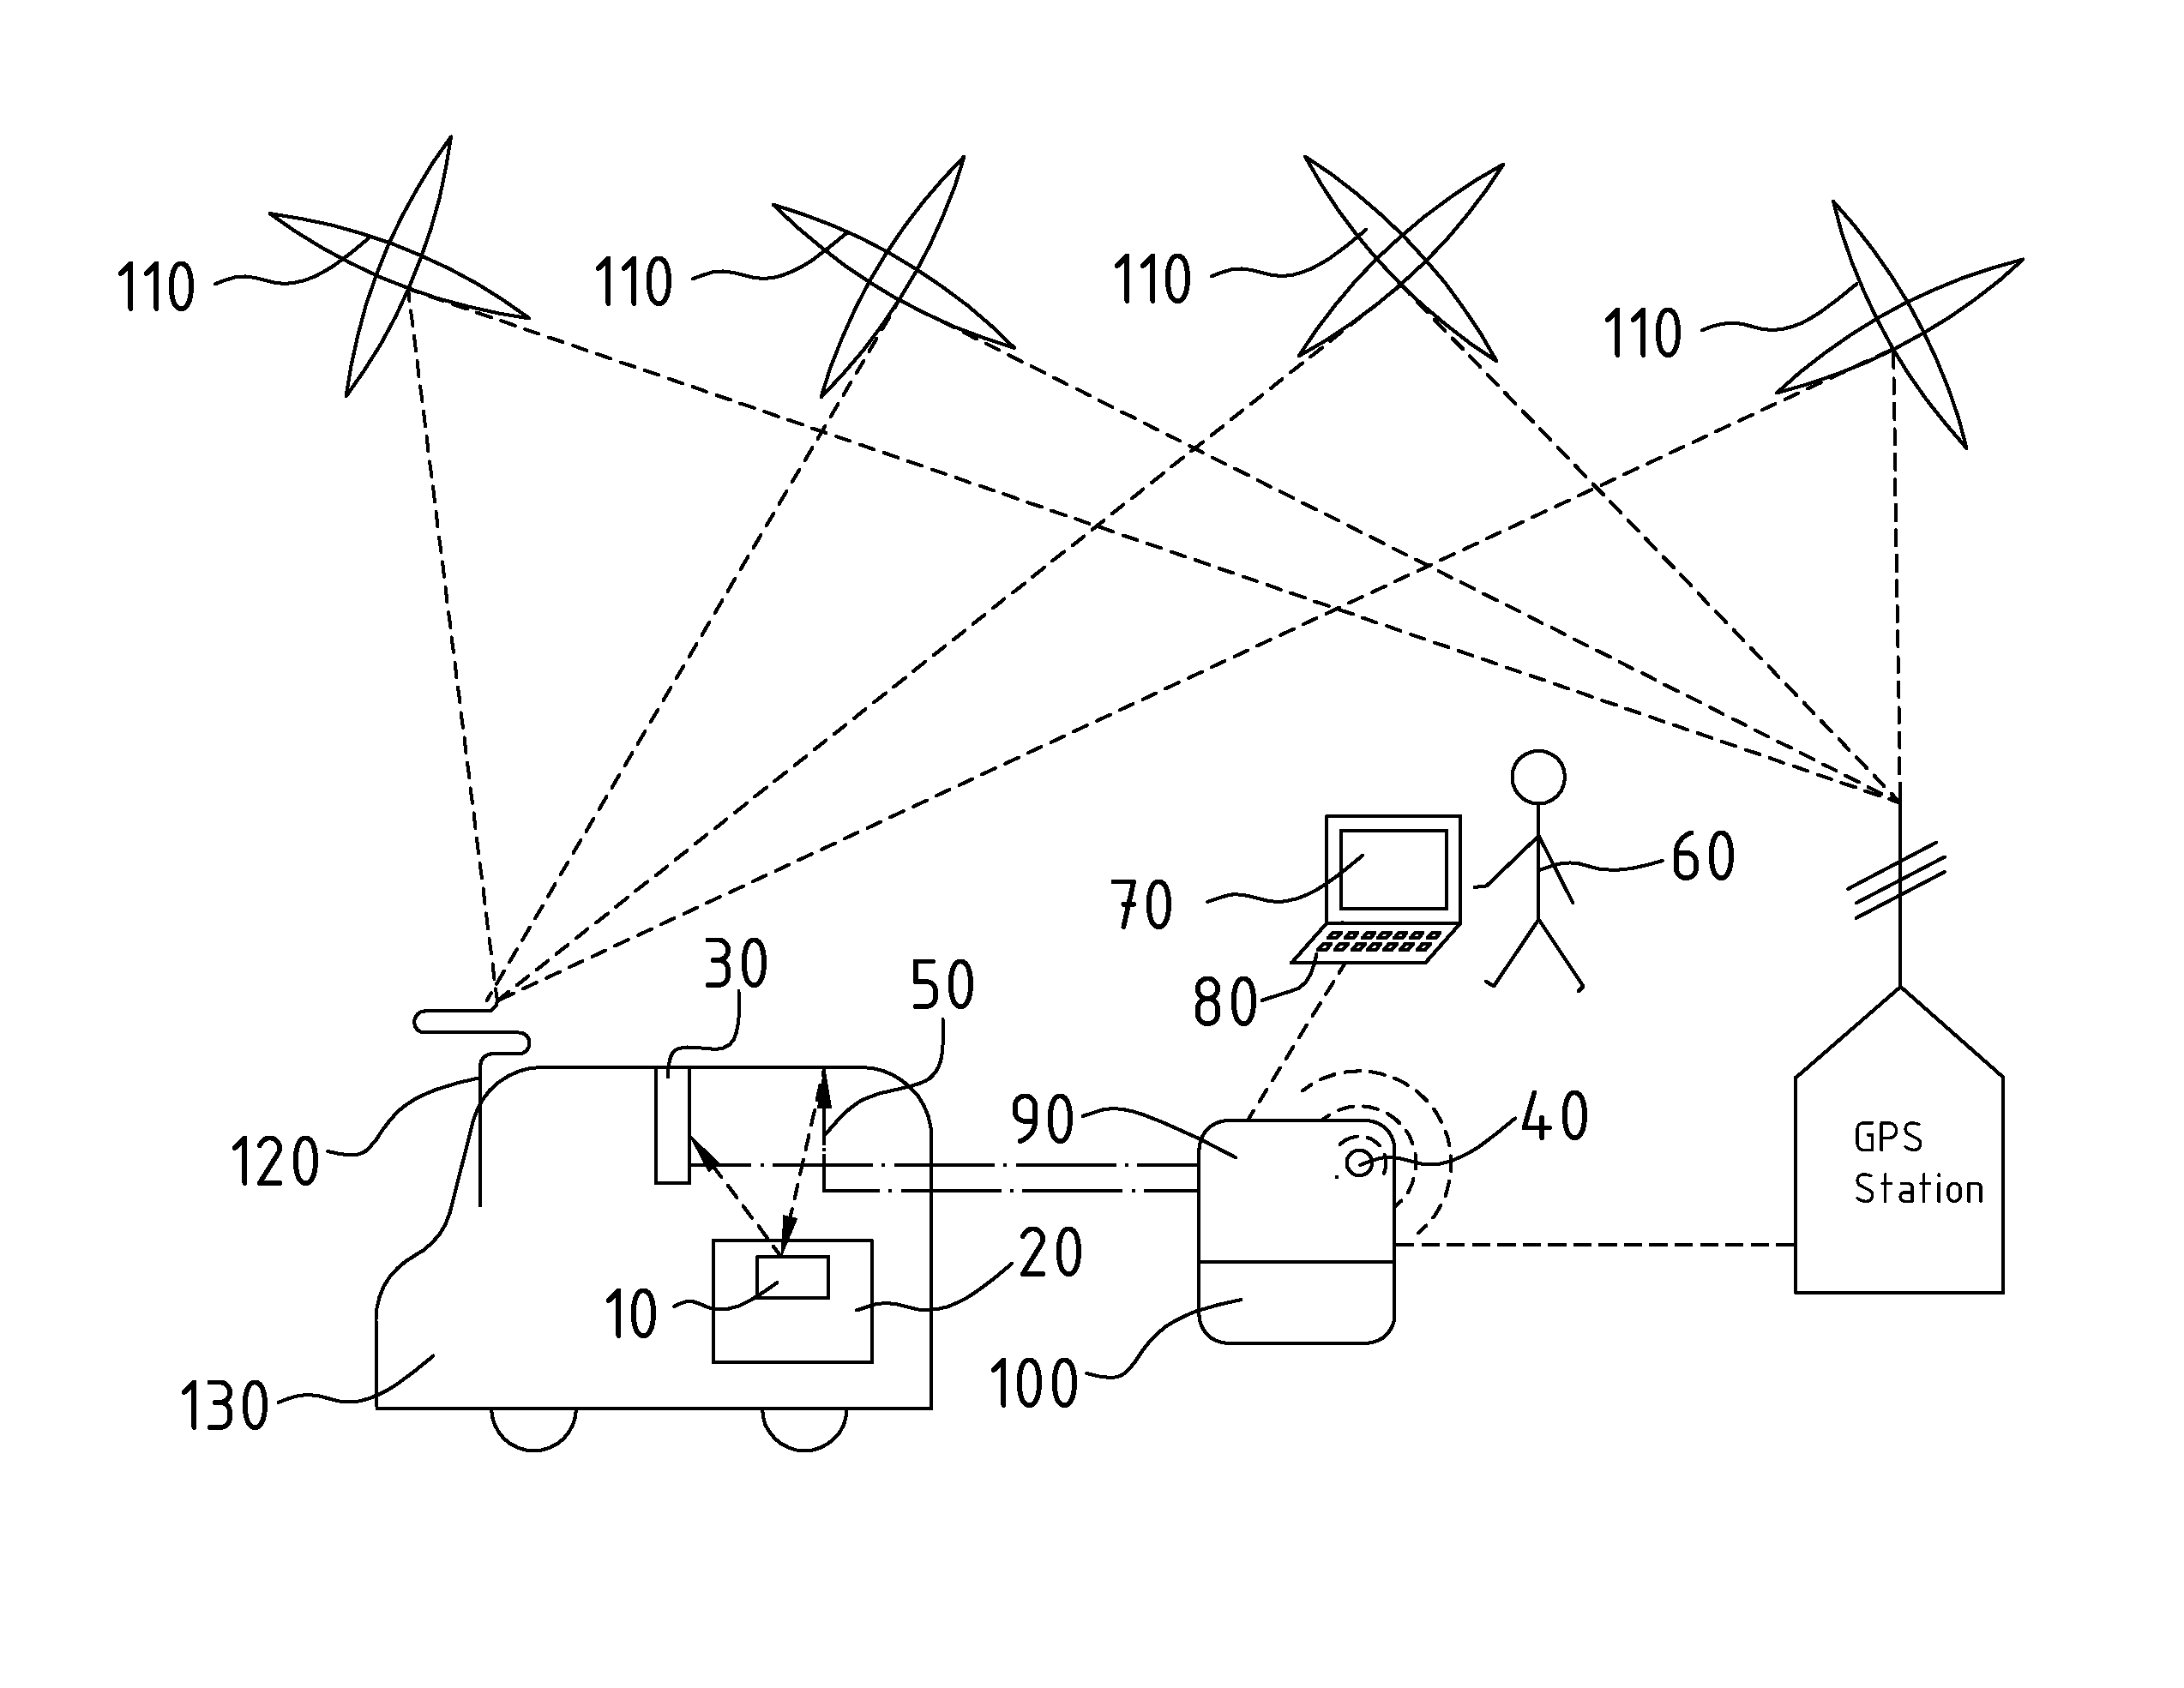 Monitoring device for a tracking system